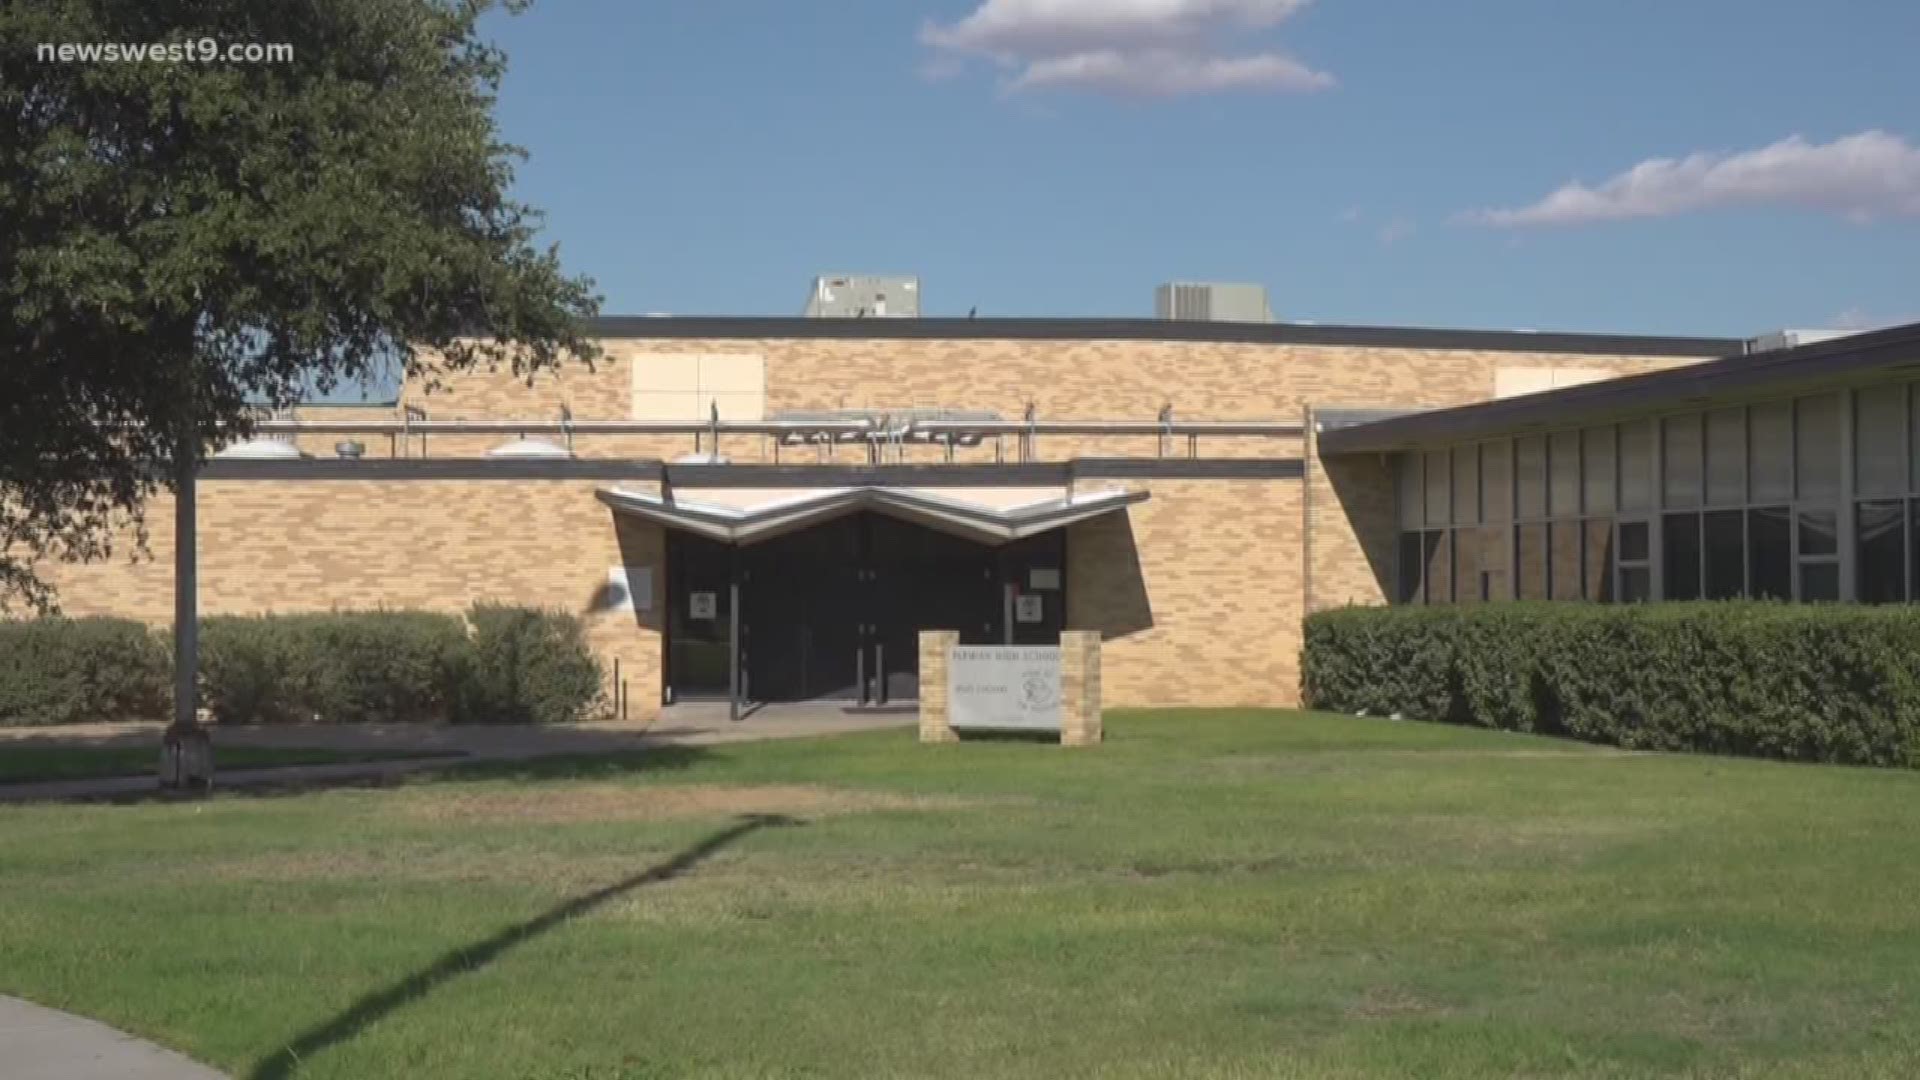 Teachers have considered retiring or quitting before the year starts to protect themselves while parents have taken issue with MISD's plan to start the year.